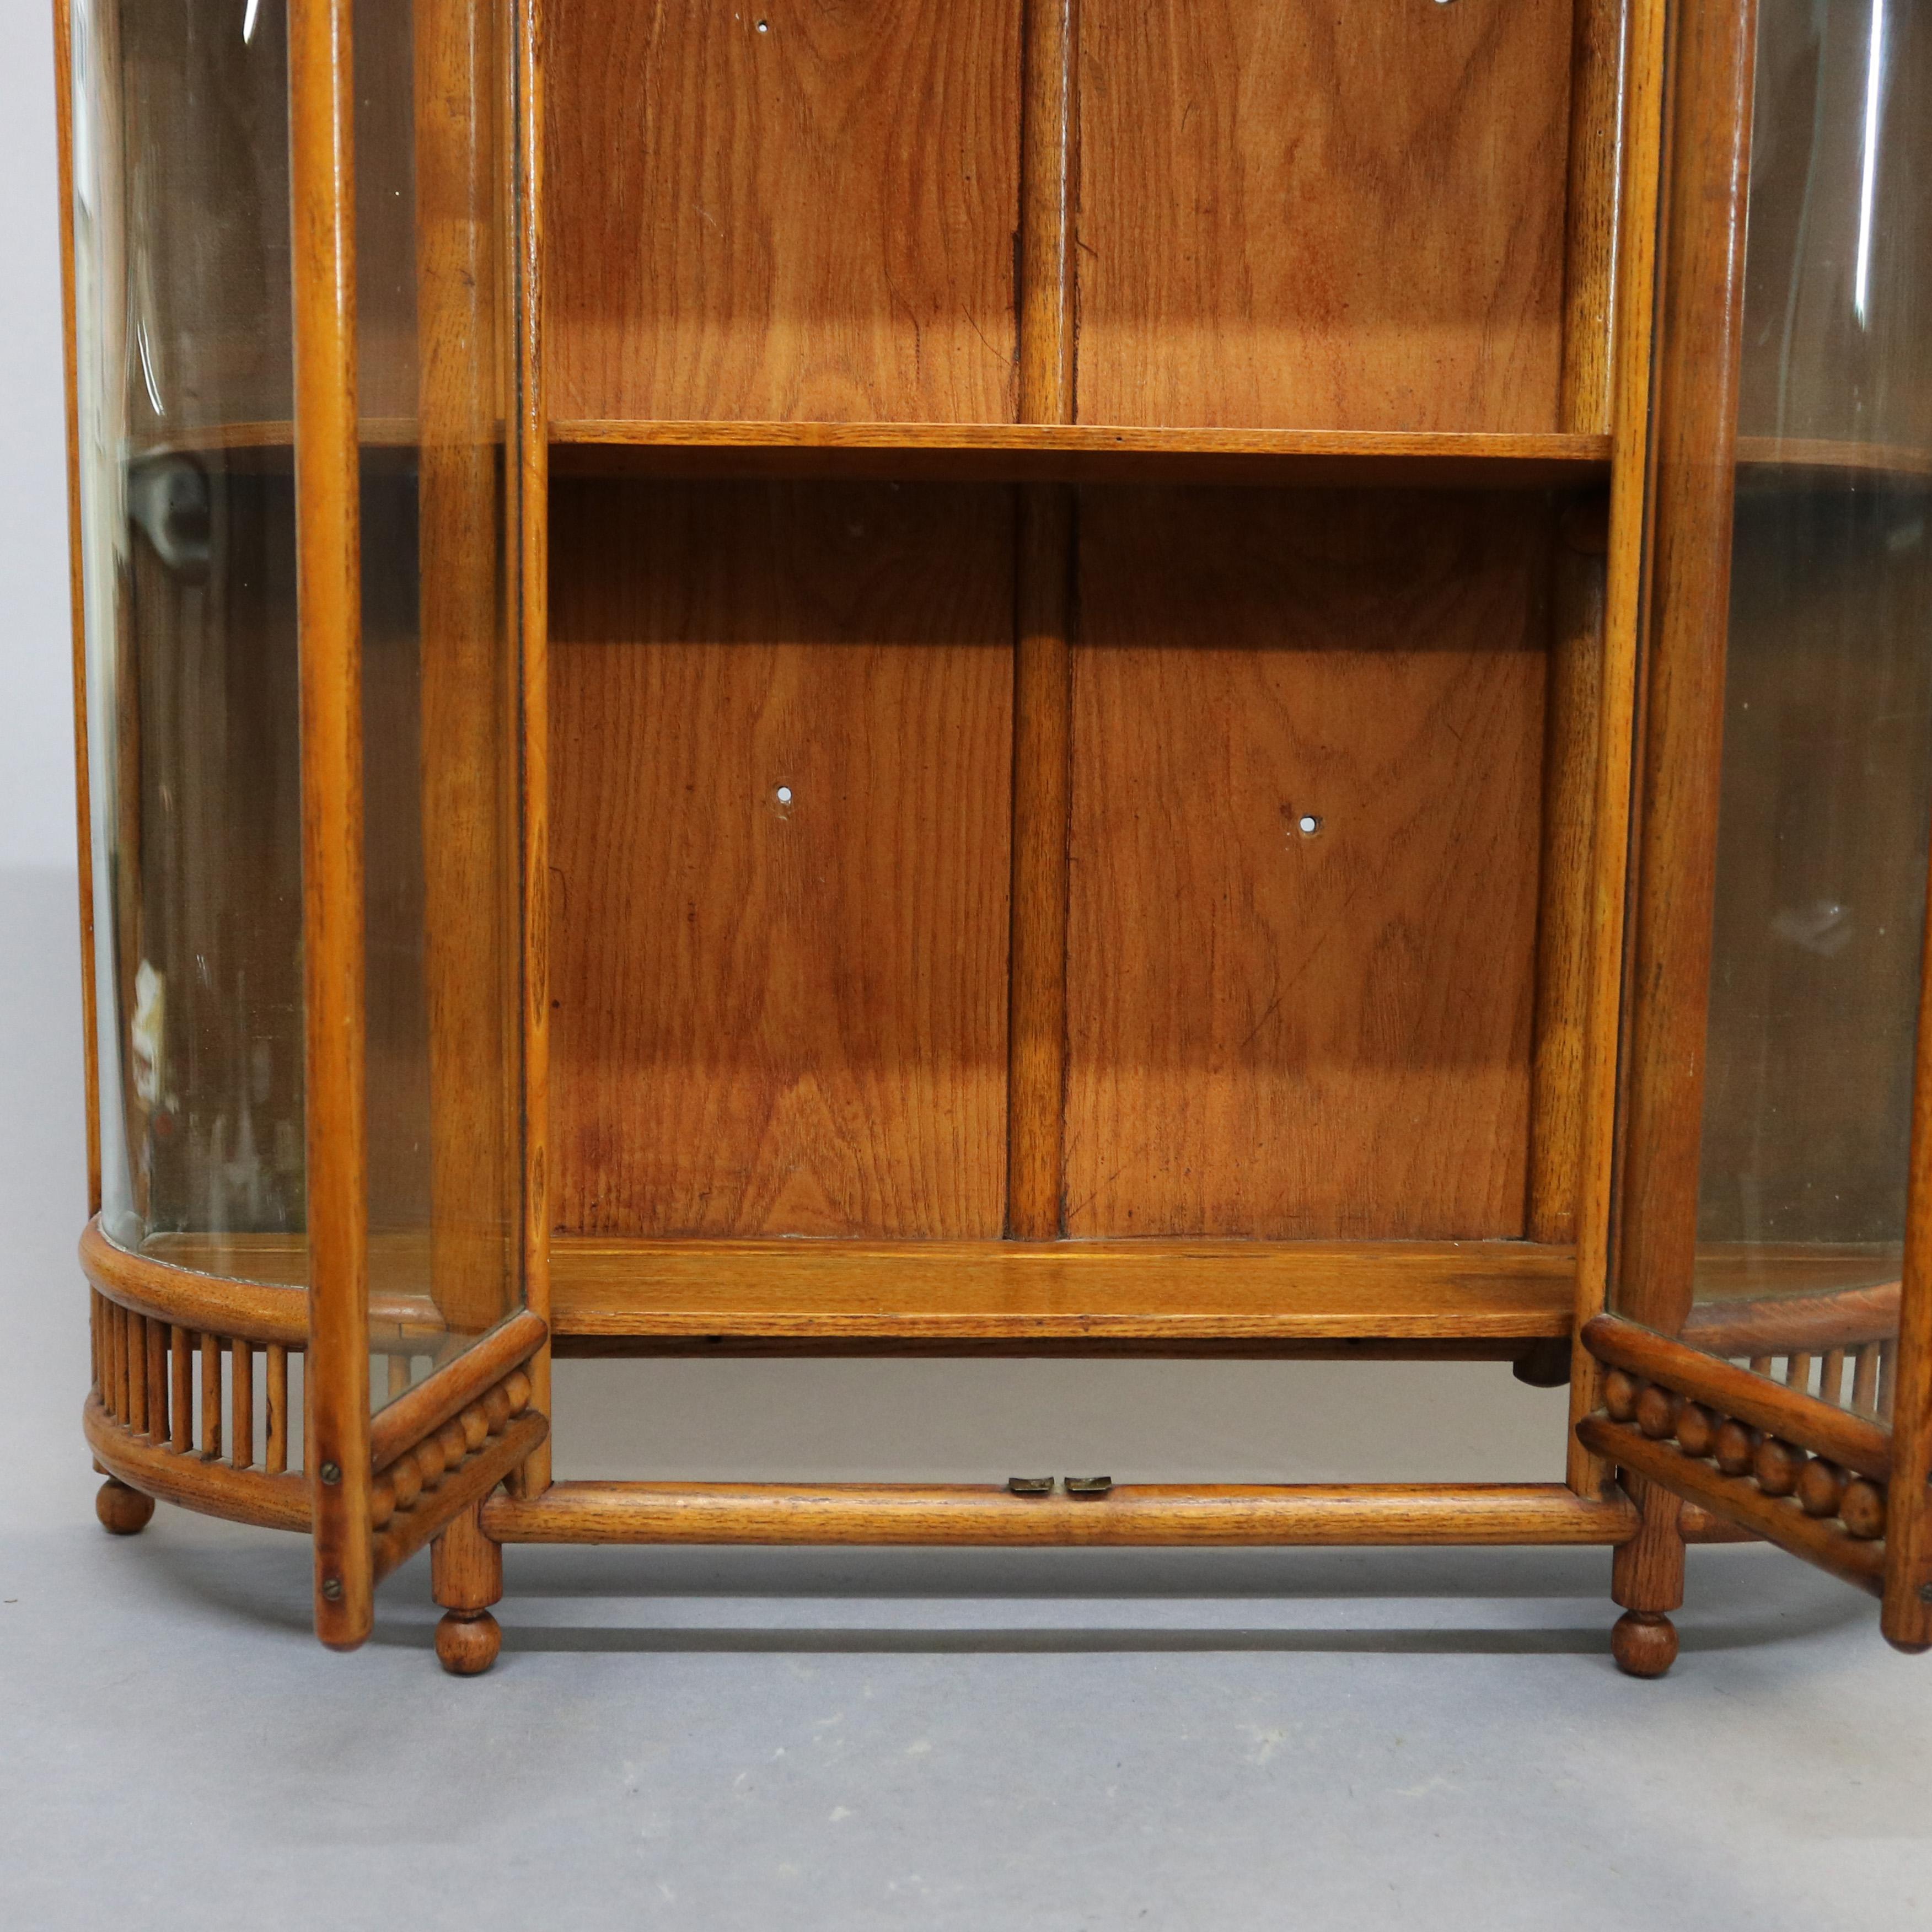 Antique Victorian Stick & Ball Oak Hanging Demilune Wall Display Cabinet, c1900 5